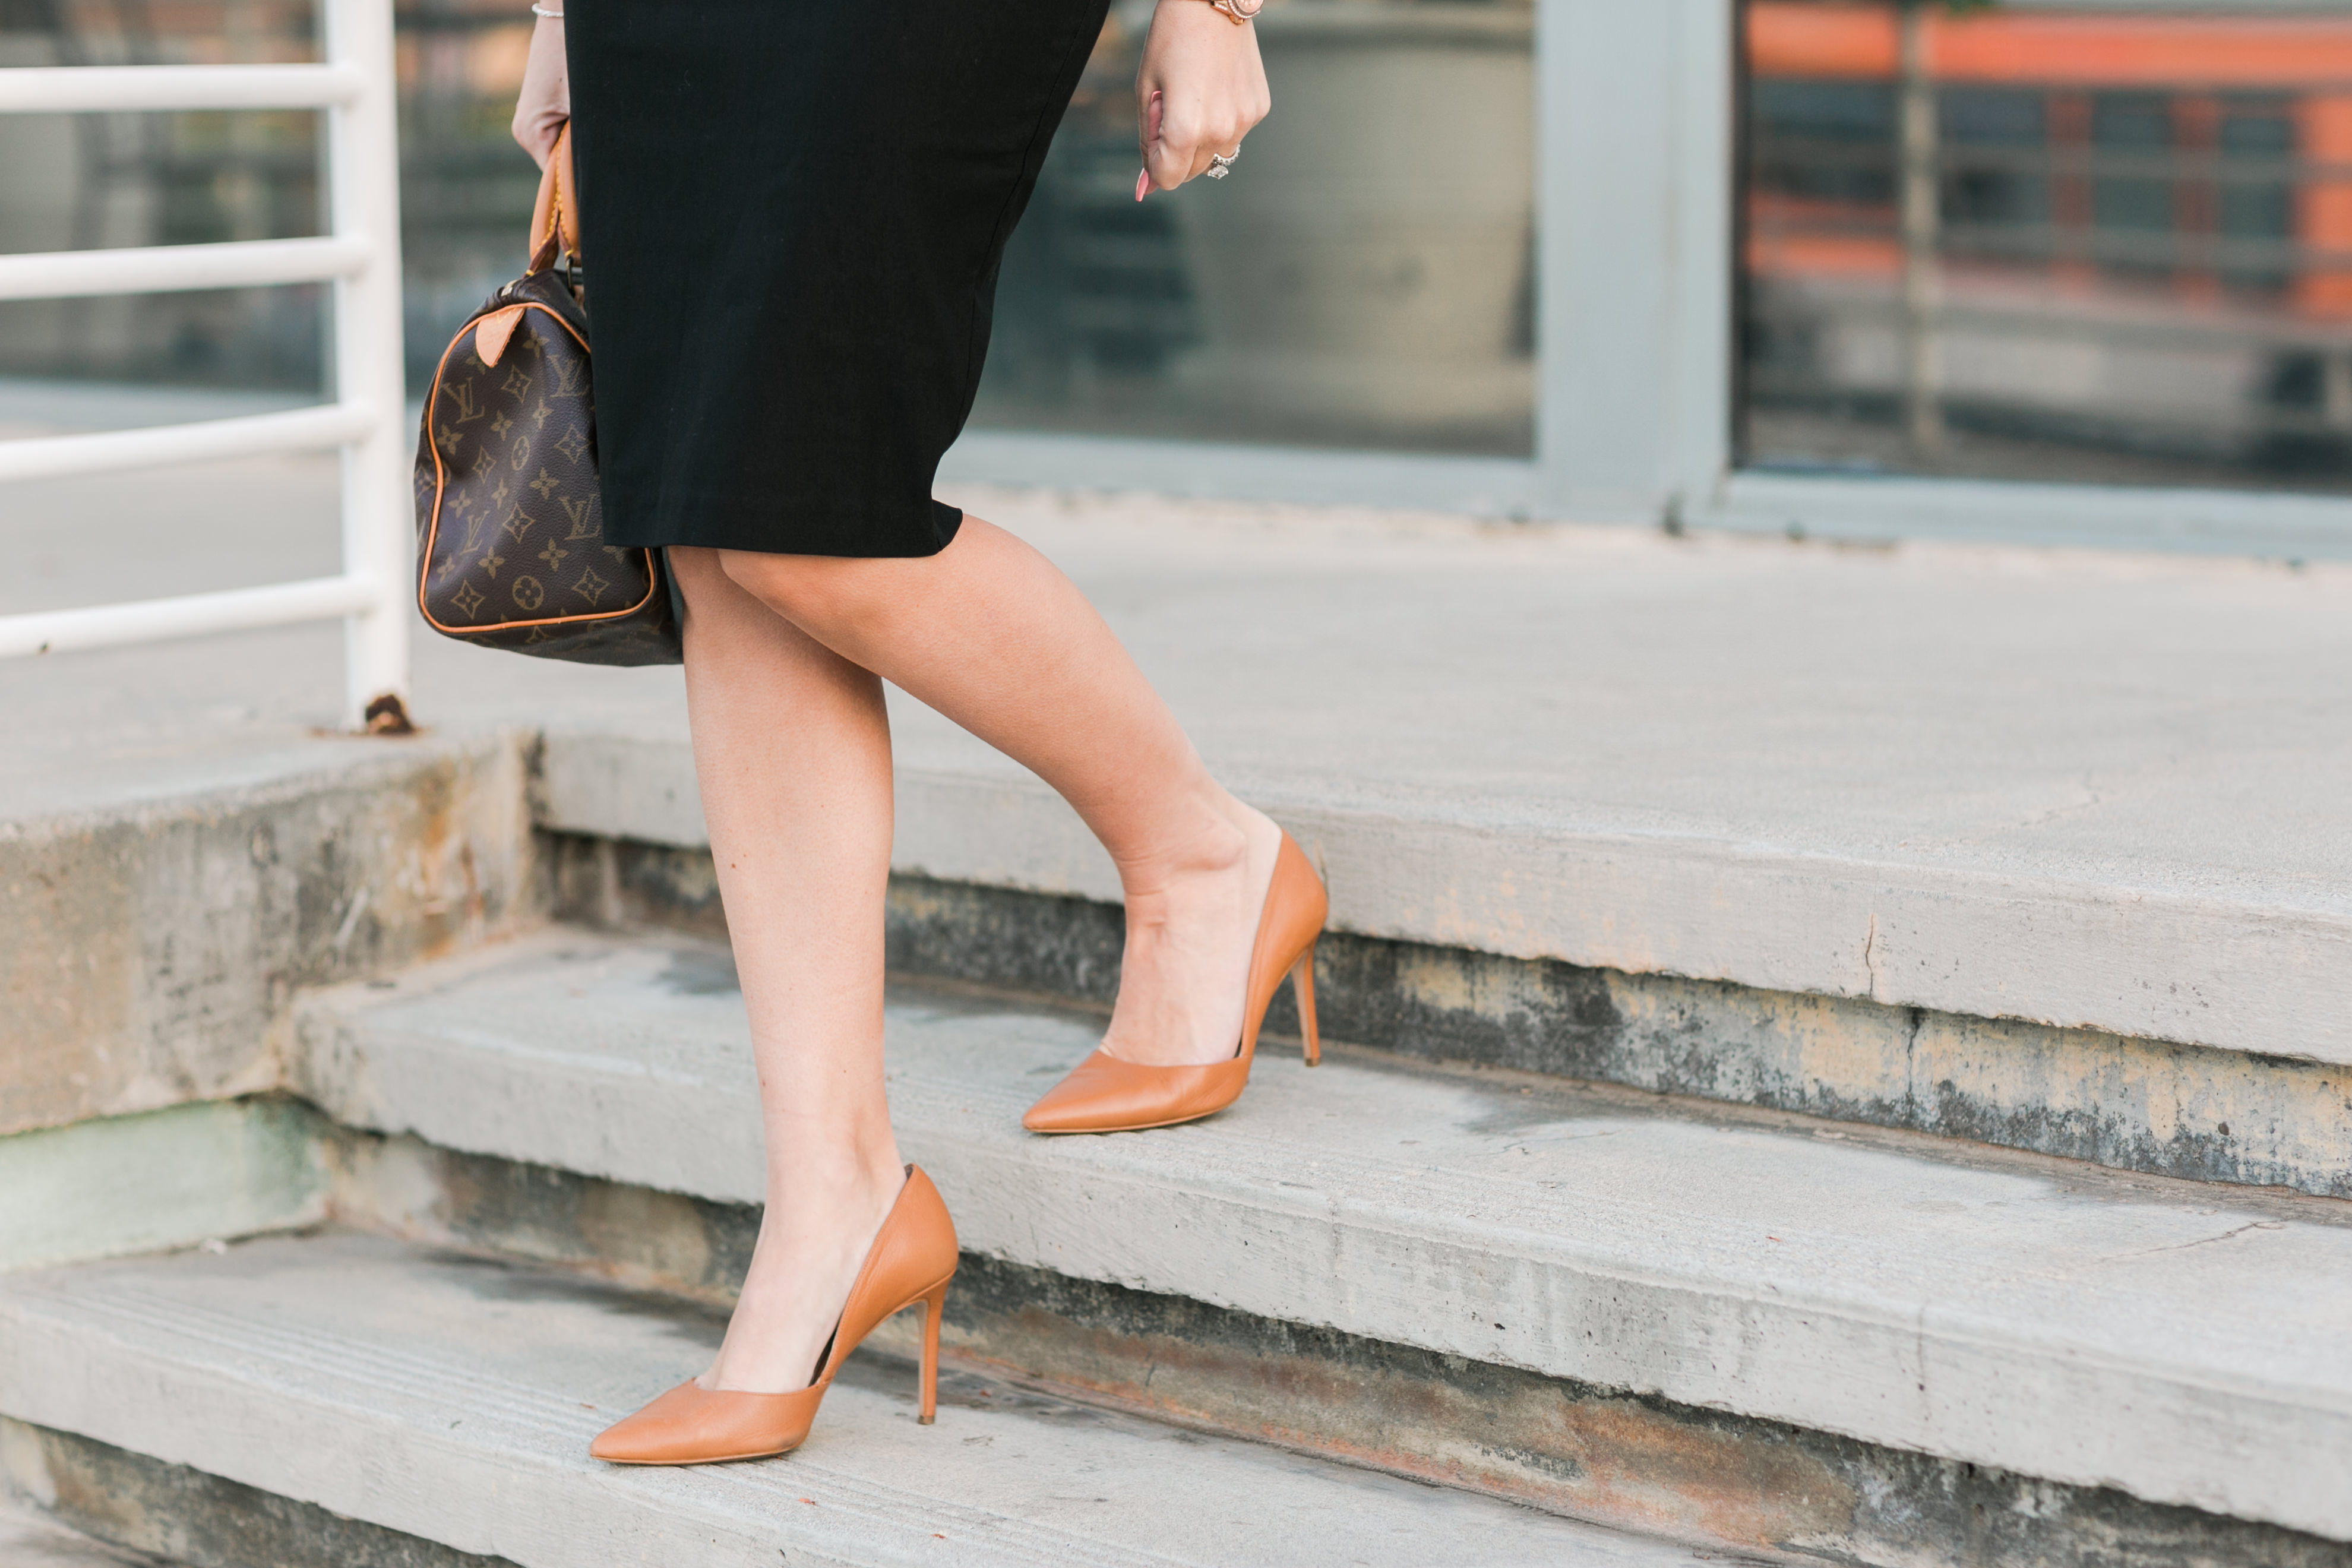 Business Casual Closet Staples - Hello Gorgeous, by Angela Lanter